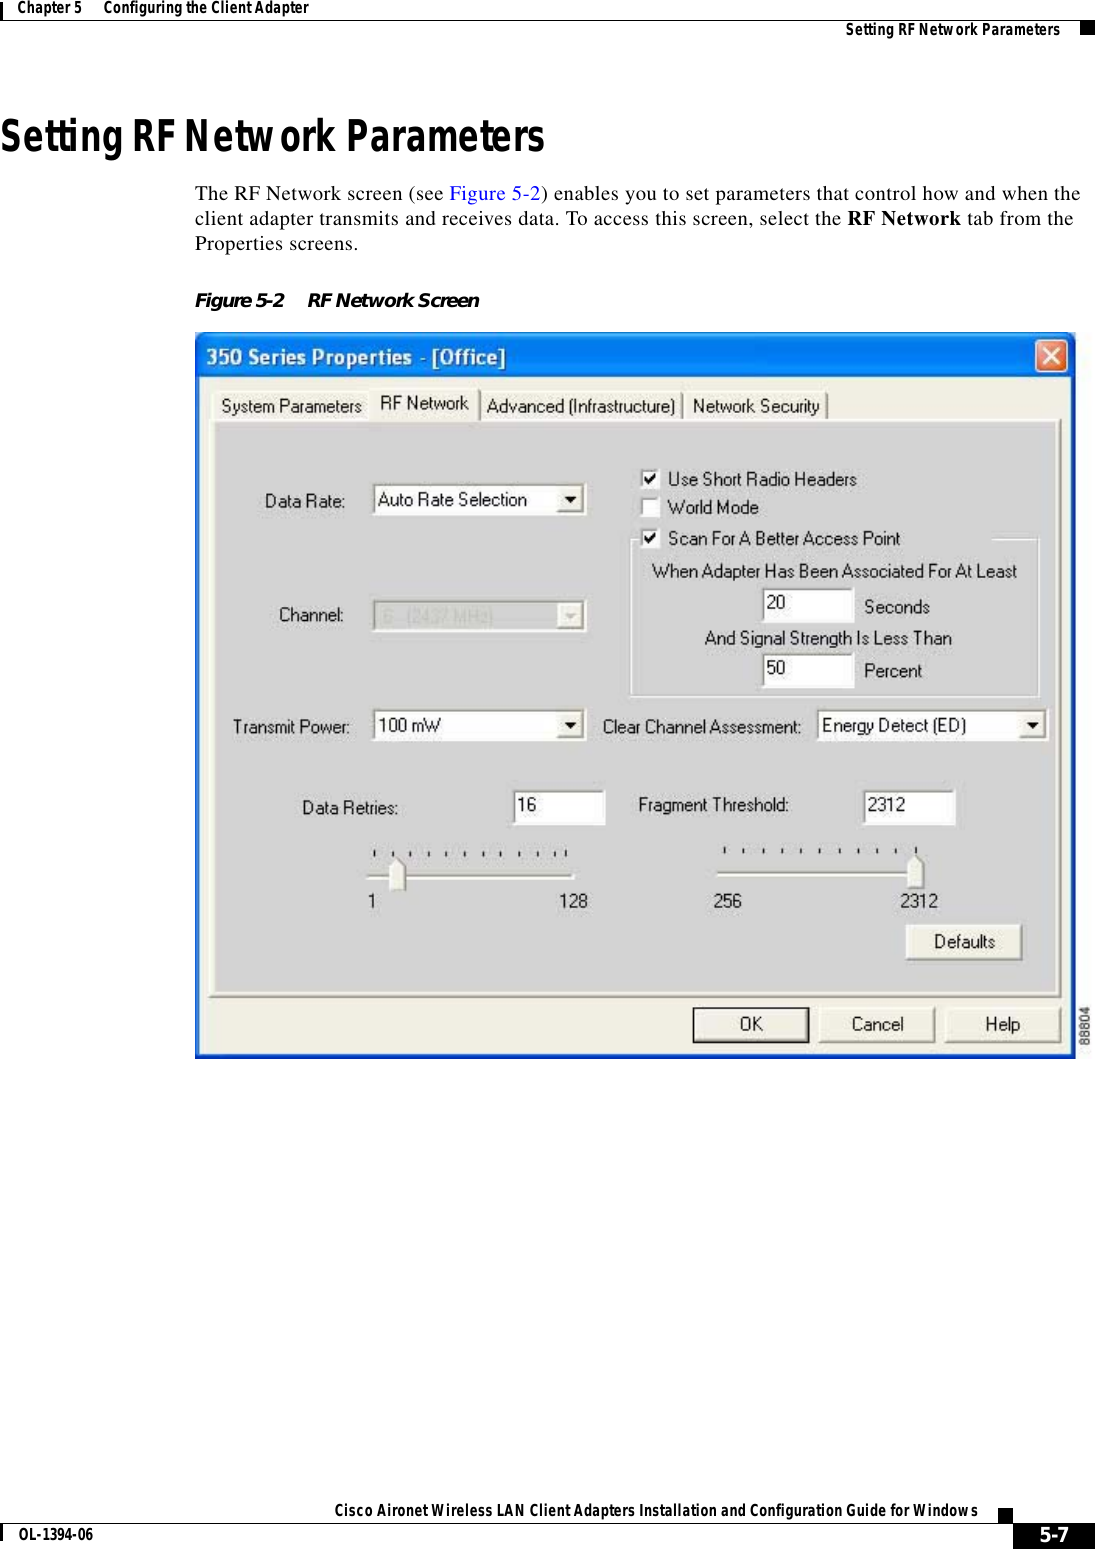 5-7Cisco Aironet Wireless LAN Client Adapters Installation and Configuration Guide for WindowsOL-1394-06Chapter 5      Configuring the Client Adapter Setting RF Network ParametersSetting RF Network ParametersThe RF Network screen (see Figure 5-2) enables you to set parameters that control how and when the client adapter transmits and receives data. To access this screen, select the RF Network tab from the Properties screens.Figure 5-2 RF Network Screen